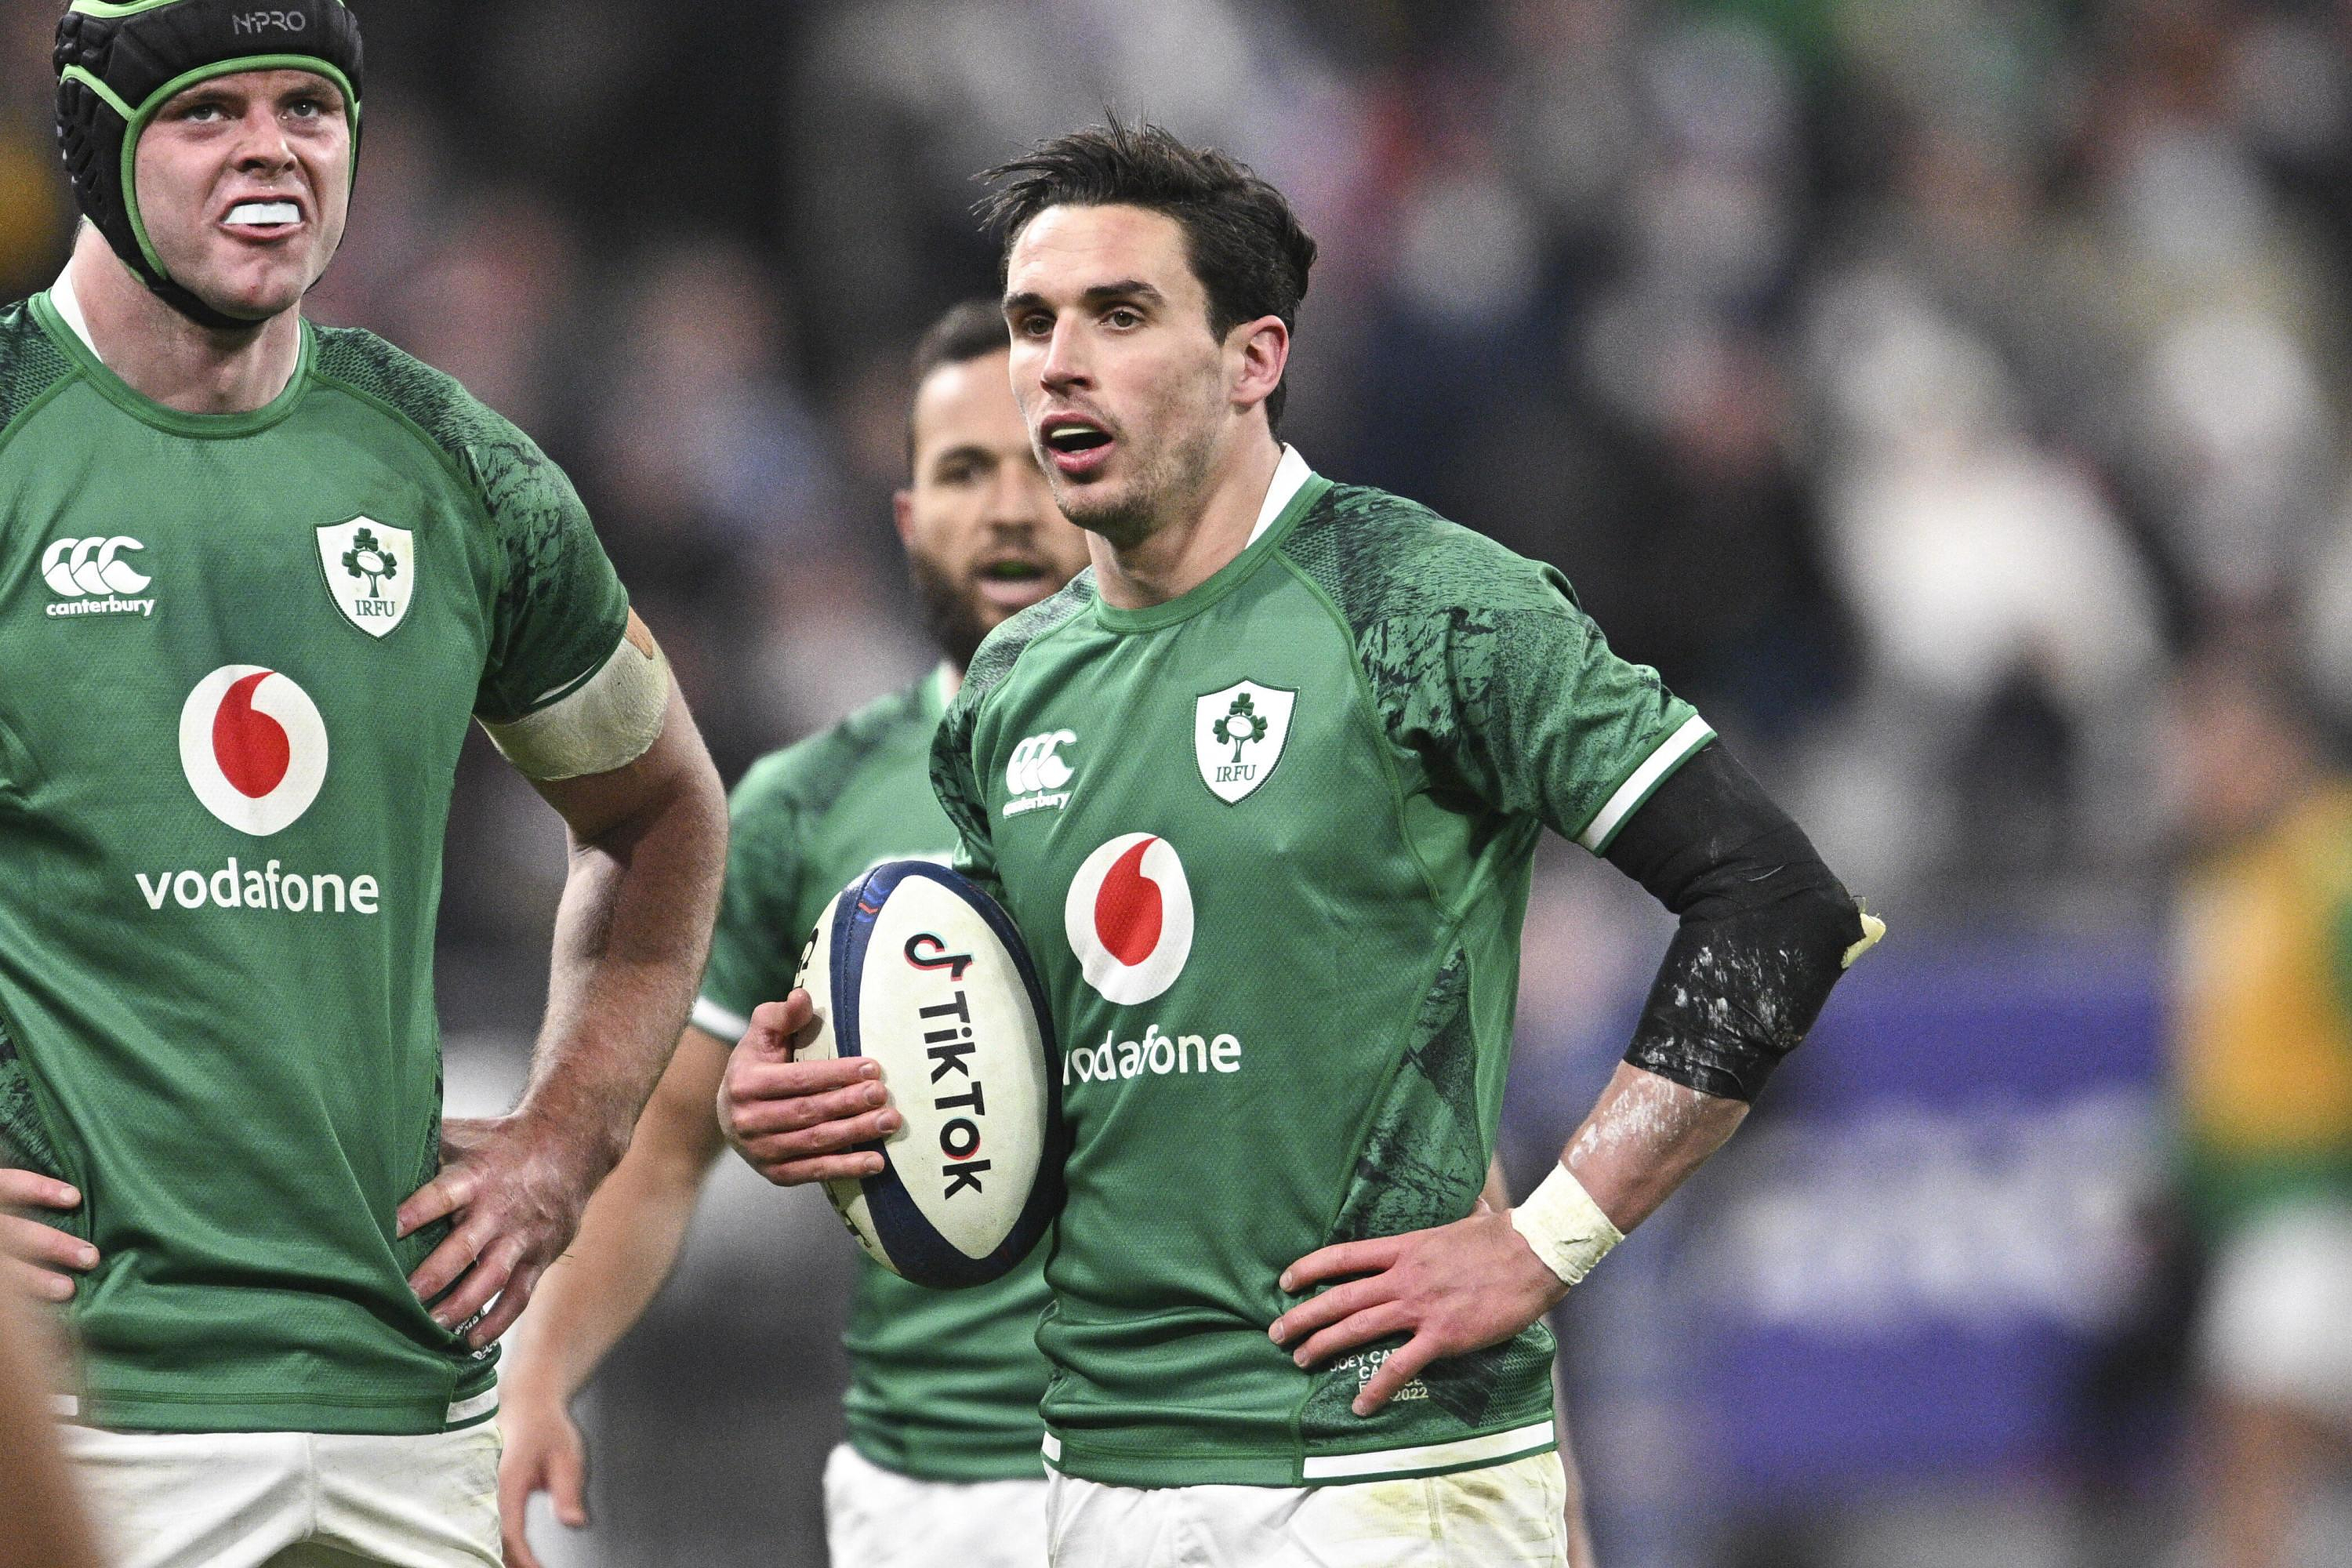 “This departure is exactly what I need”: Irishman Joey Carbery will join UBB